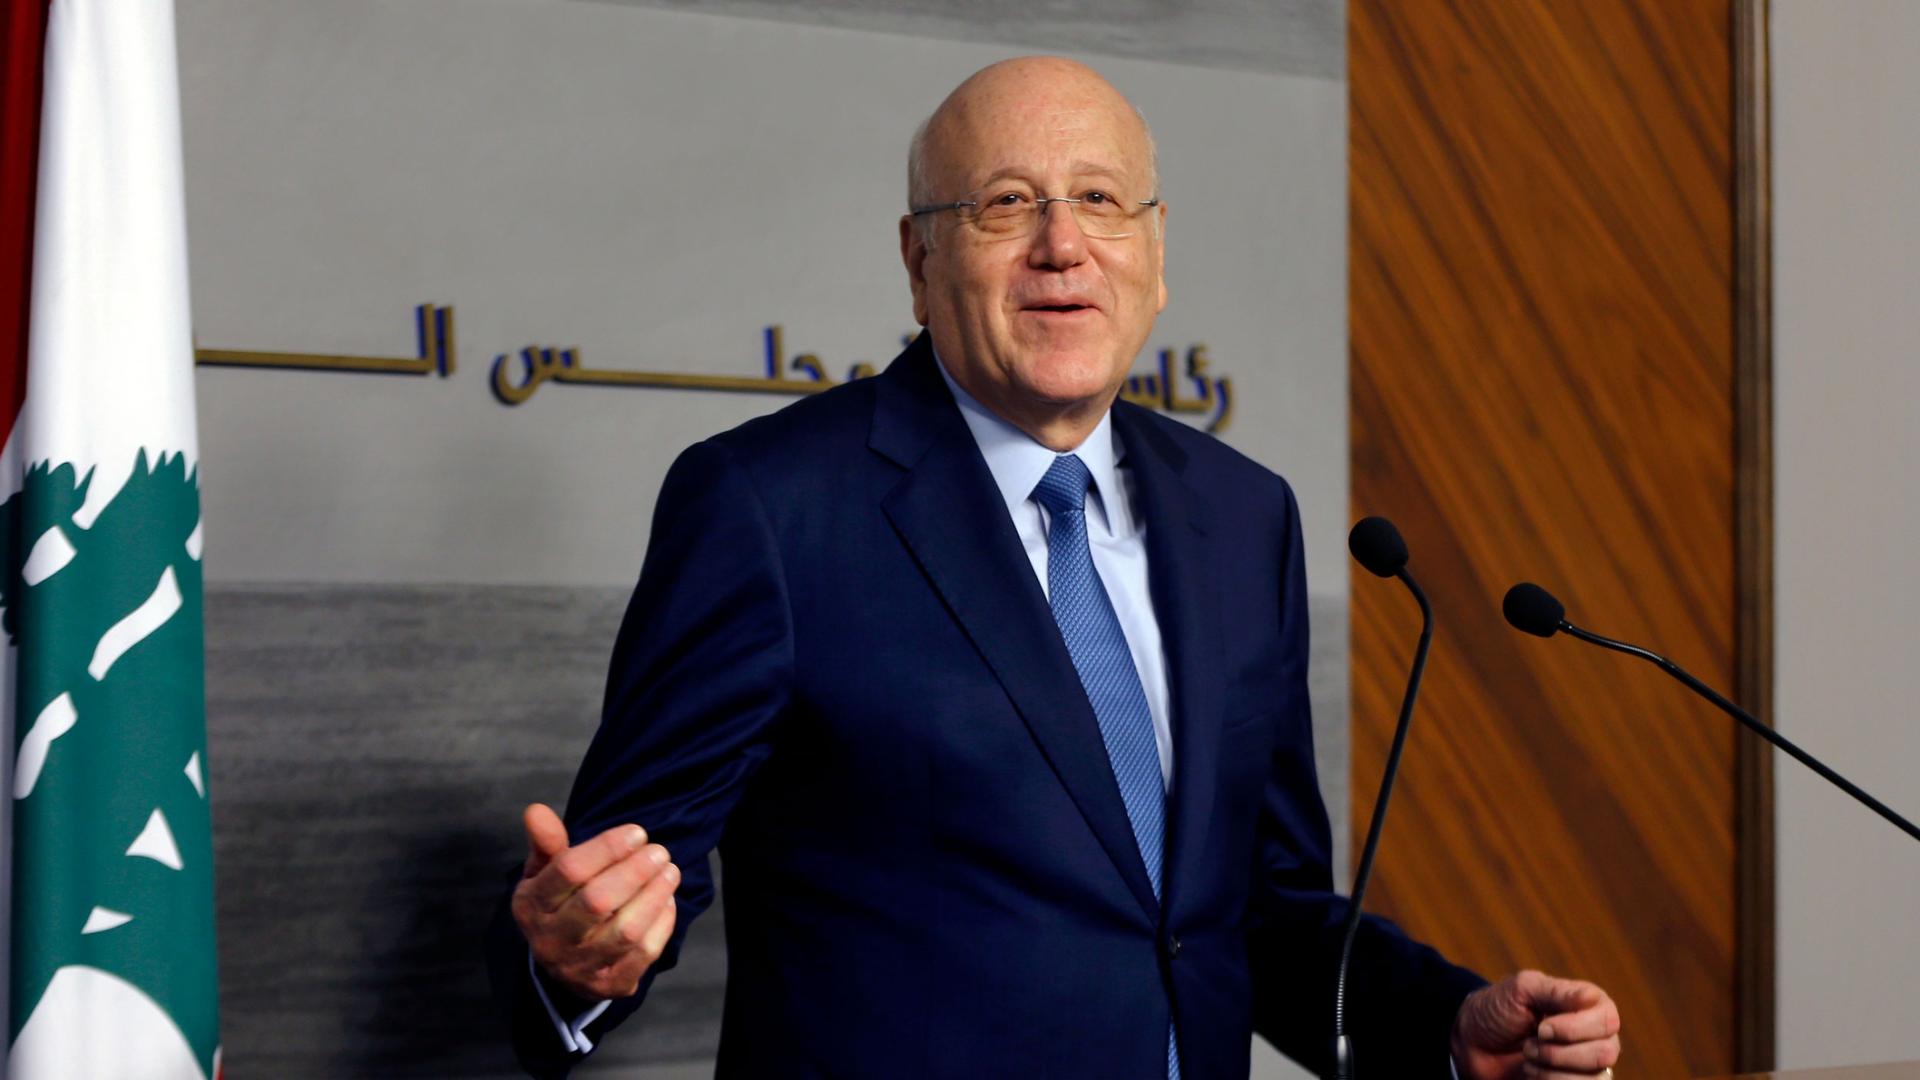 Lebanese Prime Minister Najib Mikati speaks during a joint press conference with his Jordanian counterpart Bisher Khasawneh, at the Government House in downtown Beirut, Lebanon, Thursday, Sept. 30, 2021. 